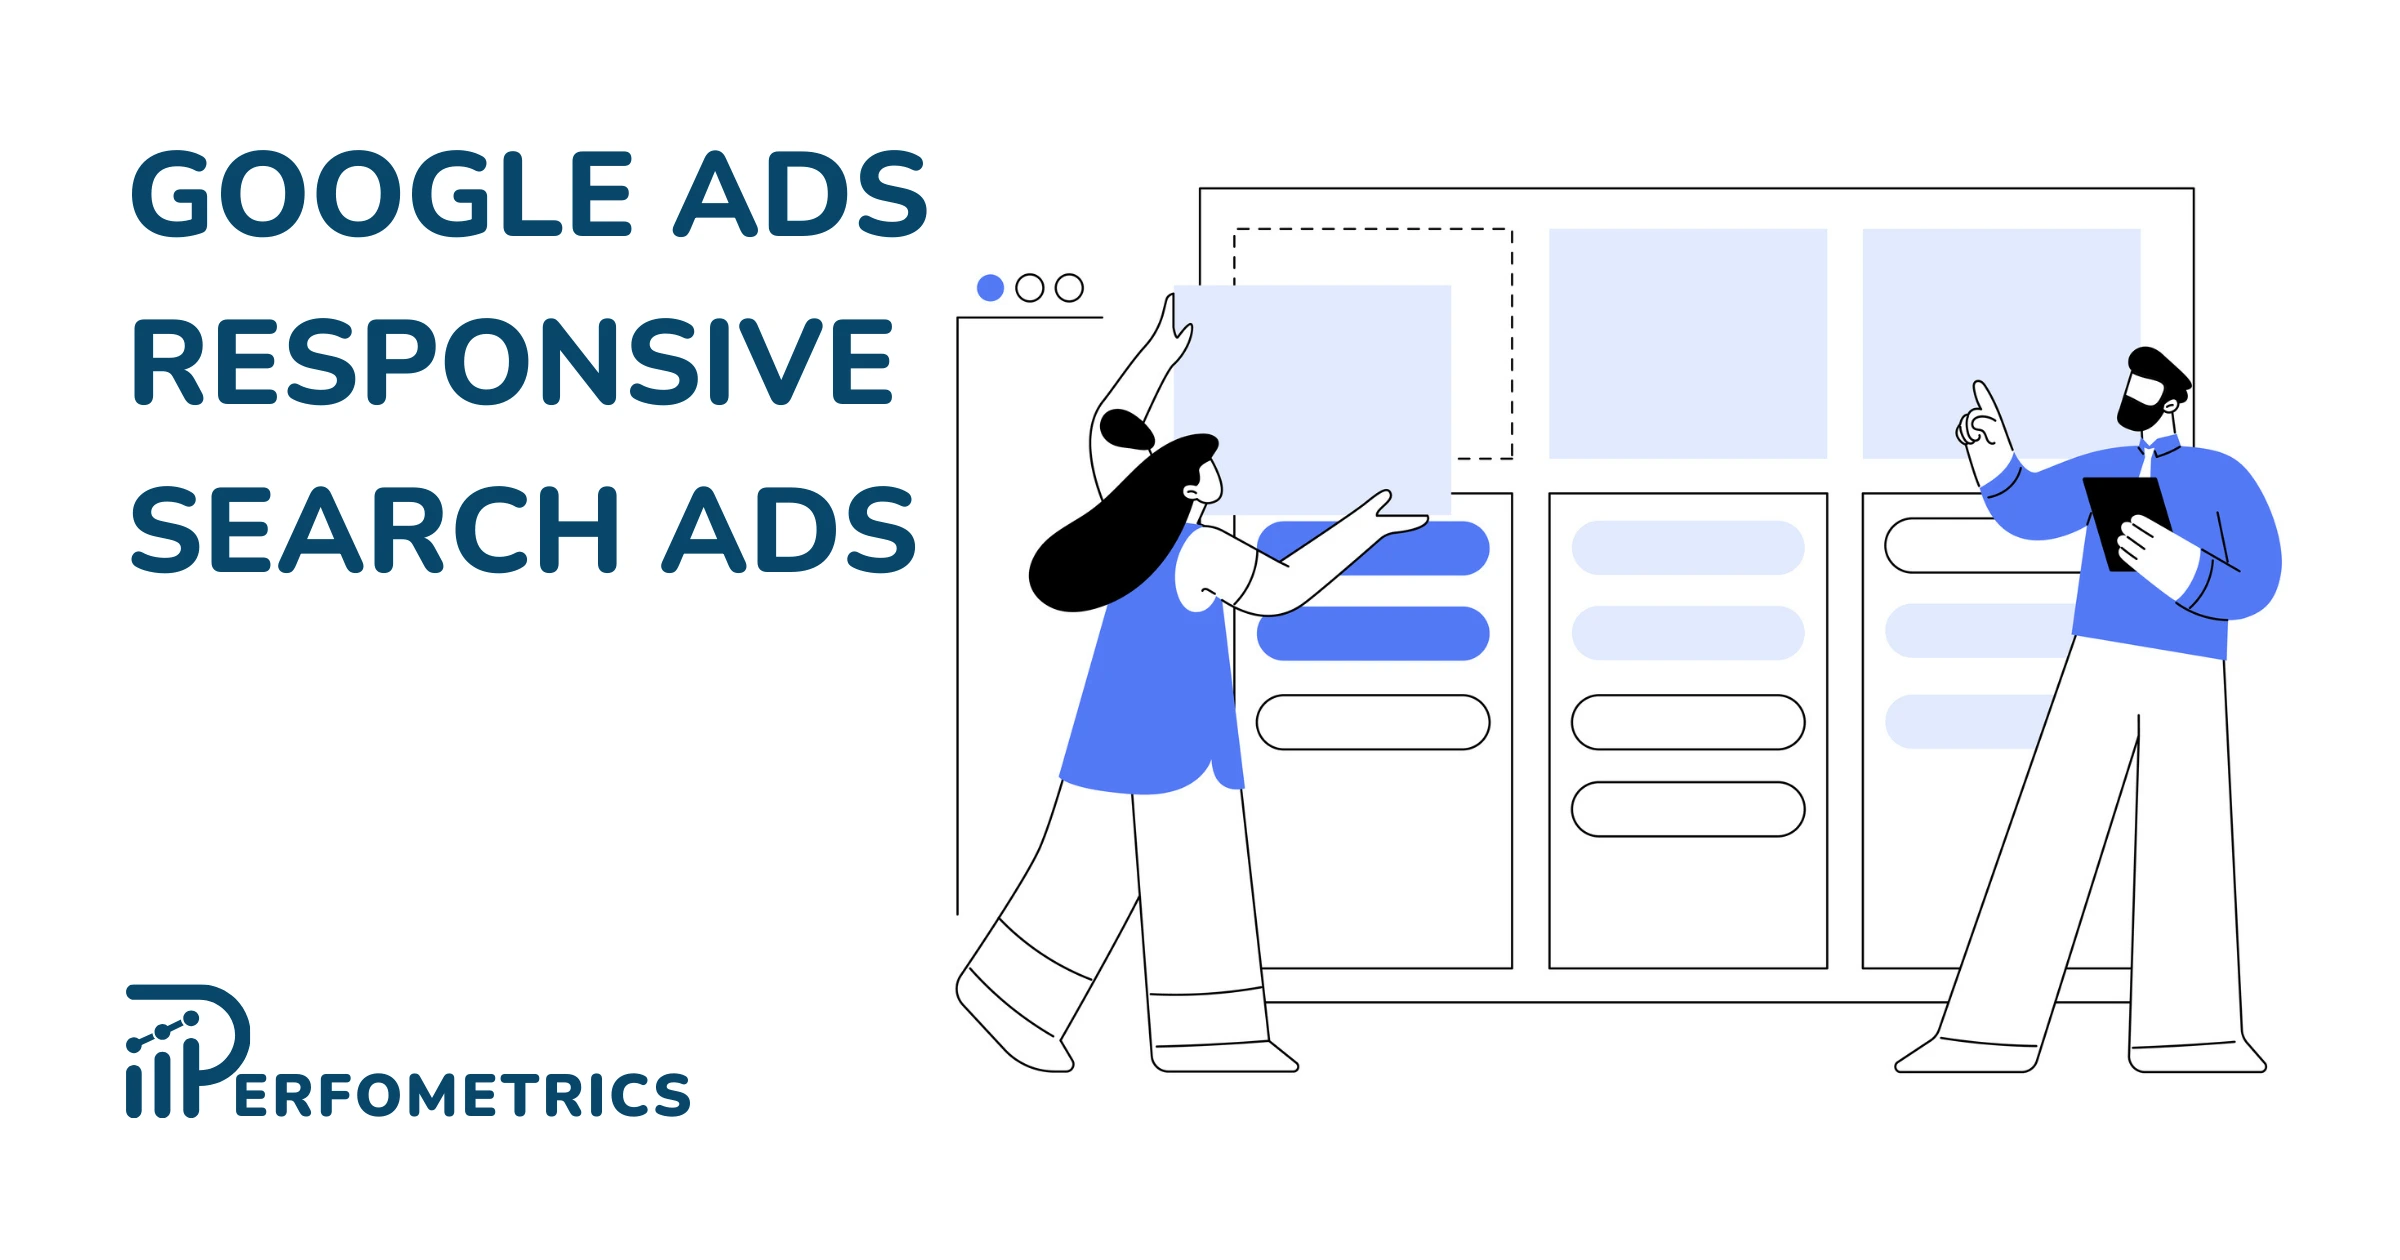 Responsive Search Ads in Google Ads